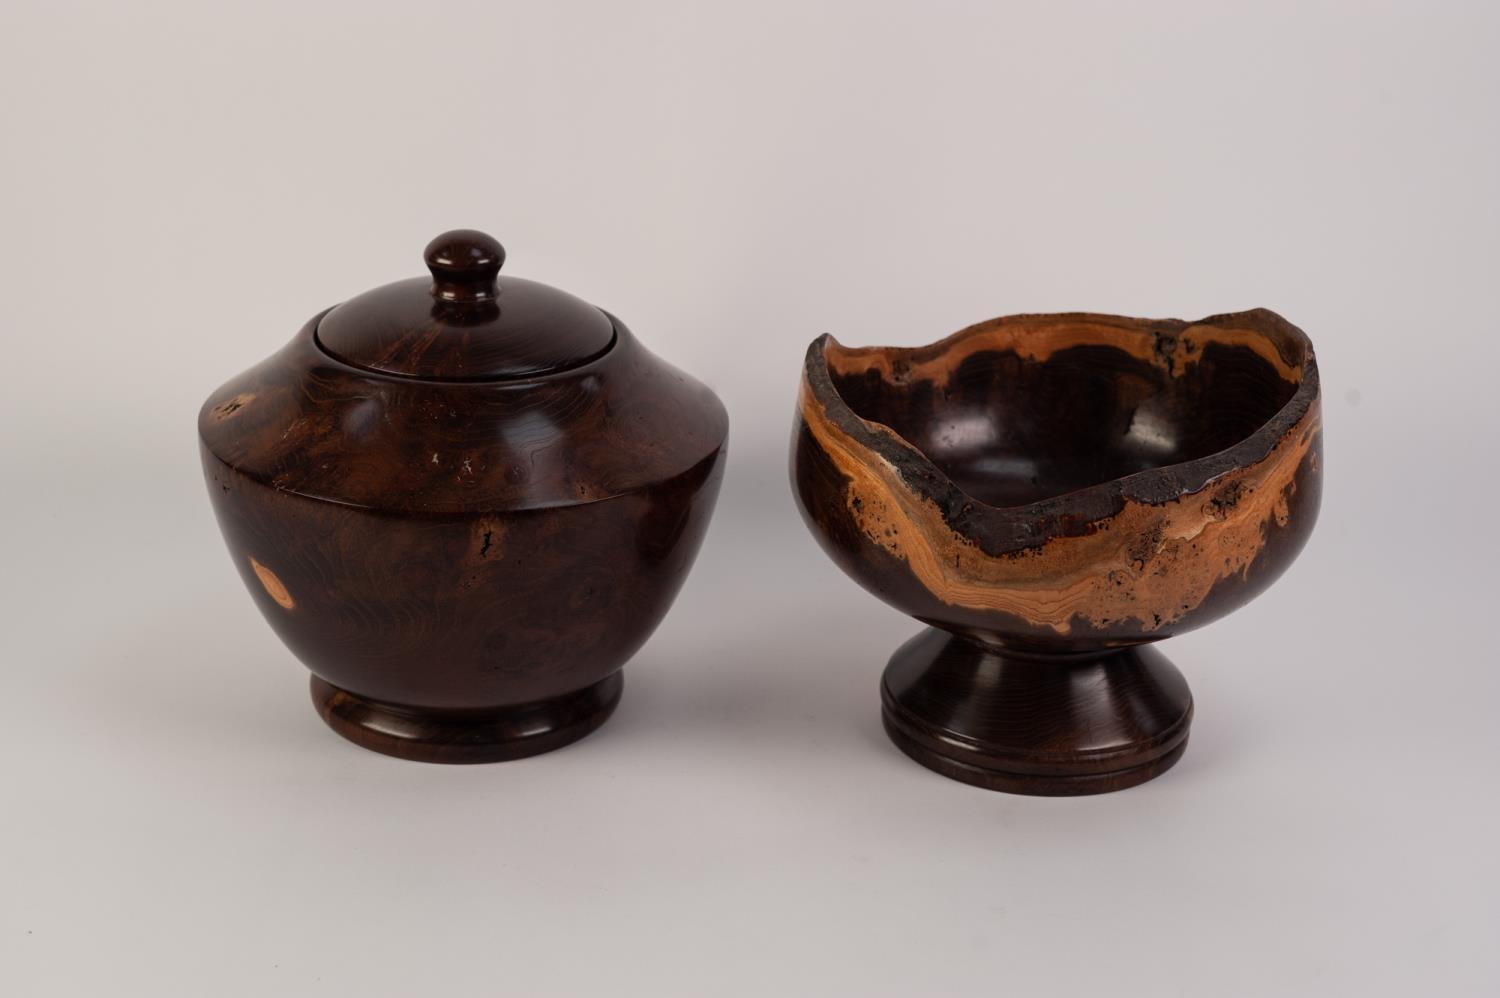 TURNED DARK BURRWOOD LARGE FOOTED BOWL AND COVER, 8? (20.3cm) high, together with a SIMILAR PEDESTAL